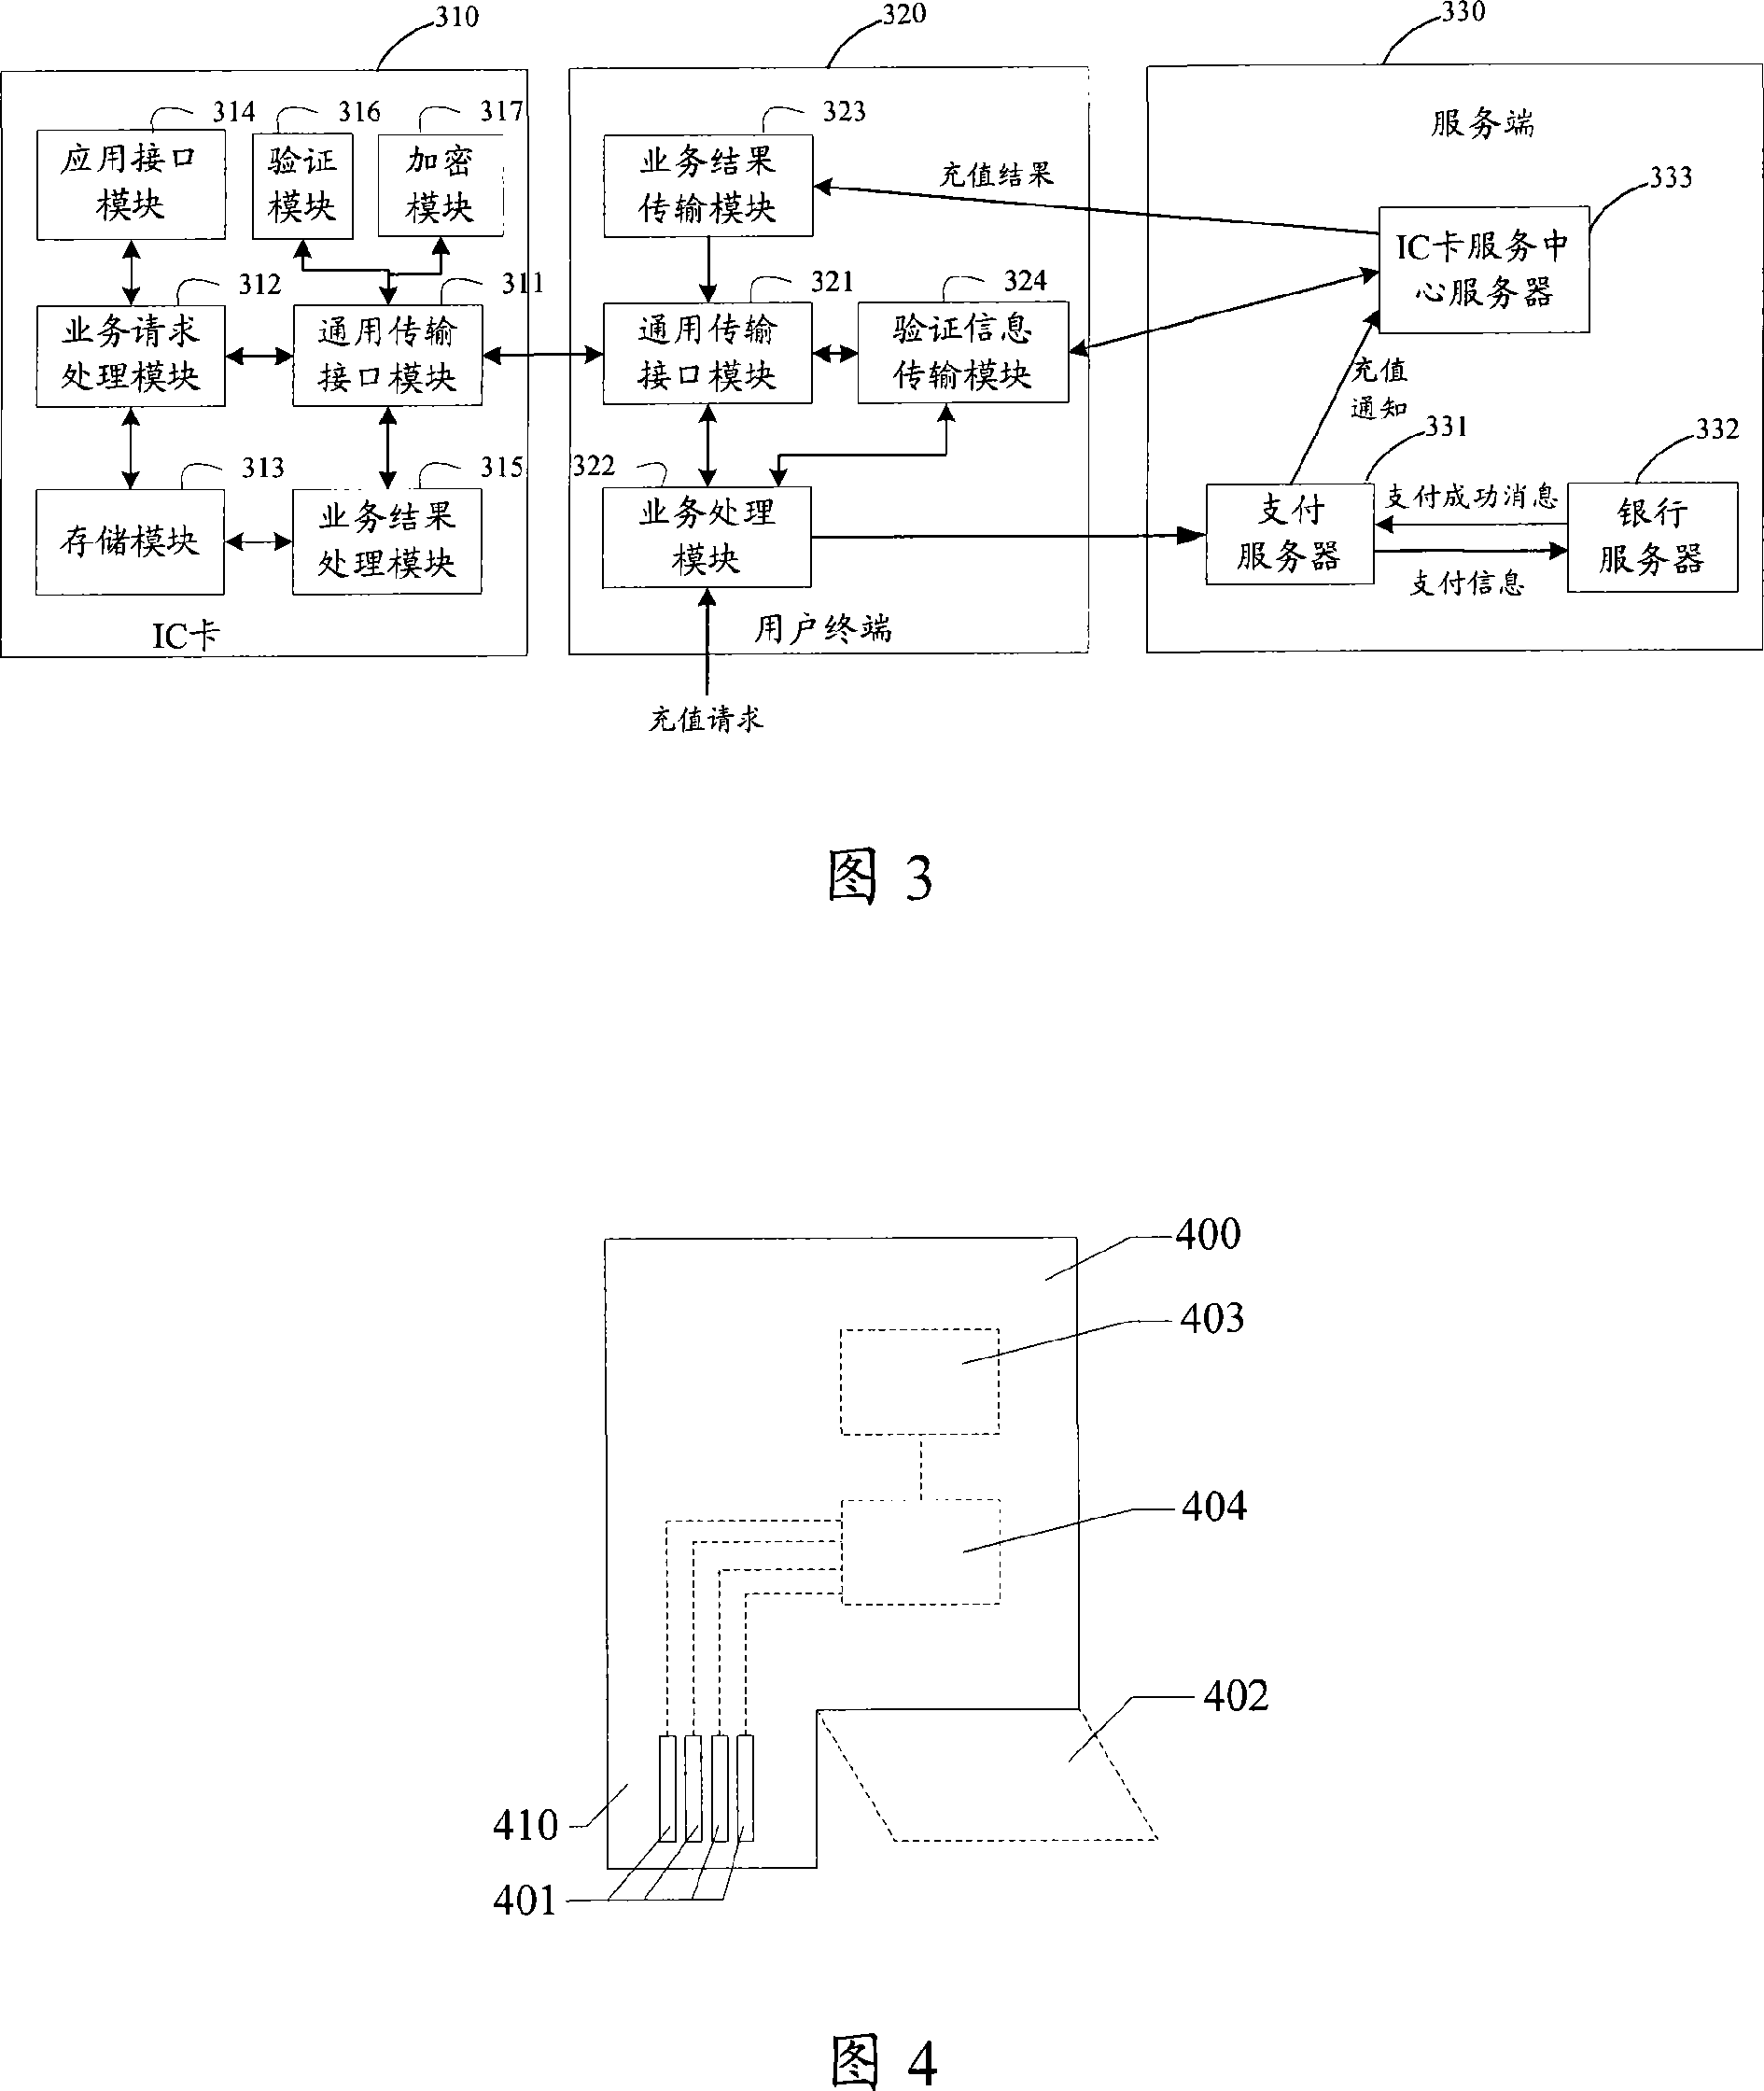 IC card, service data process system and method based on the IC card